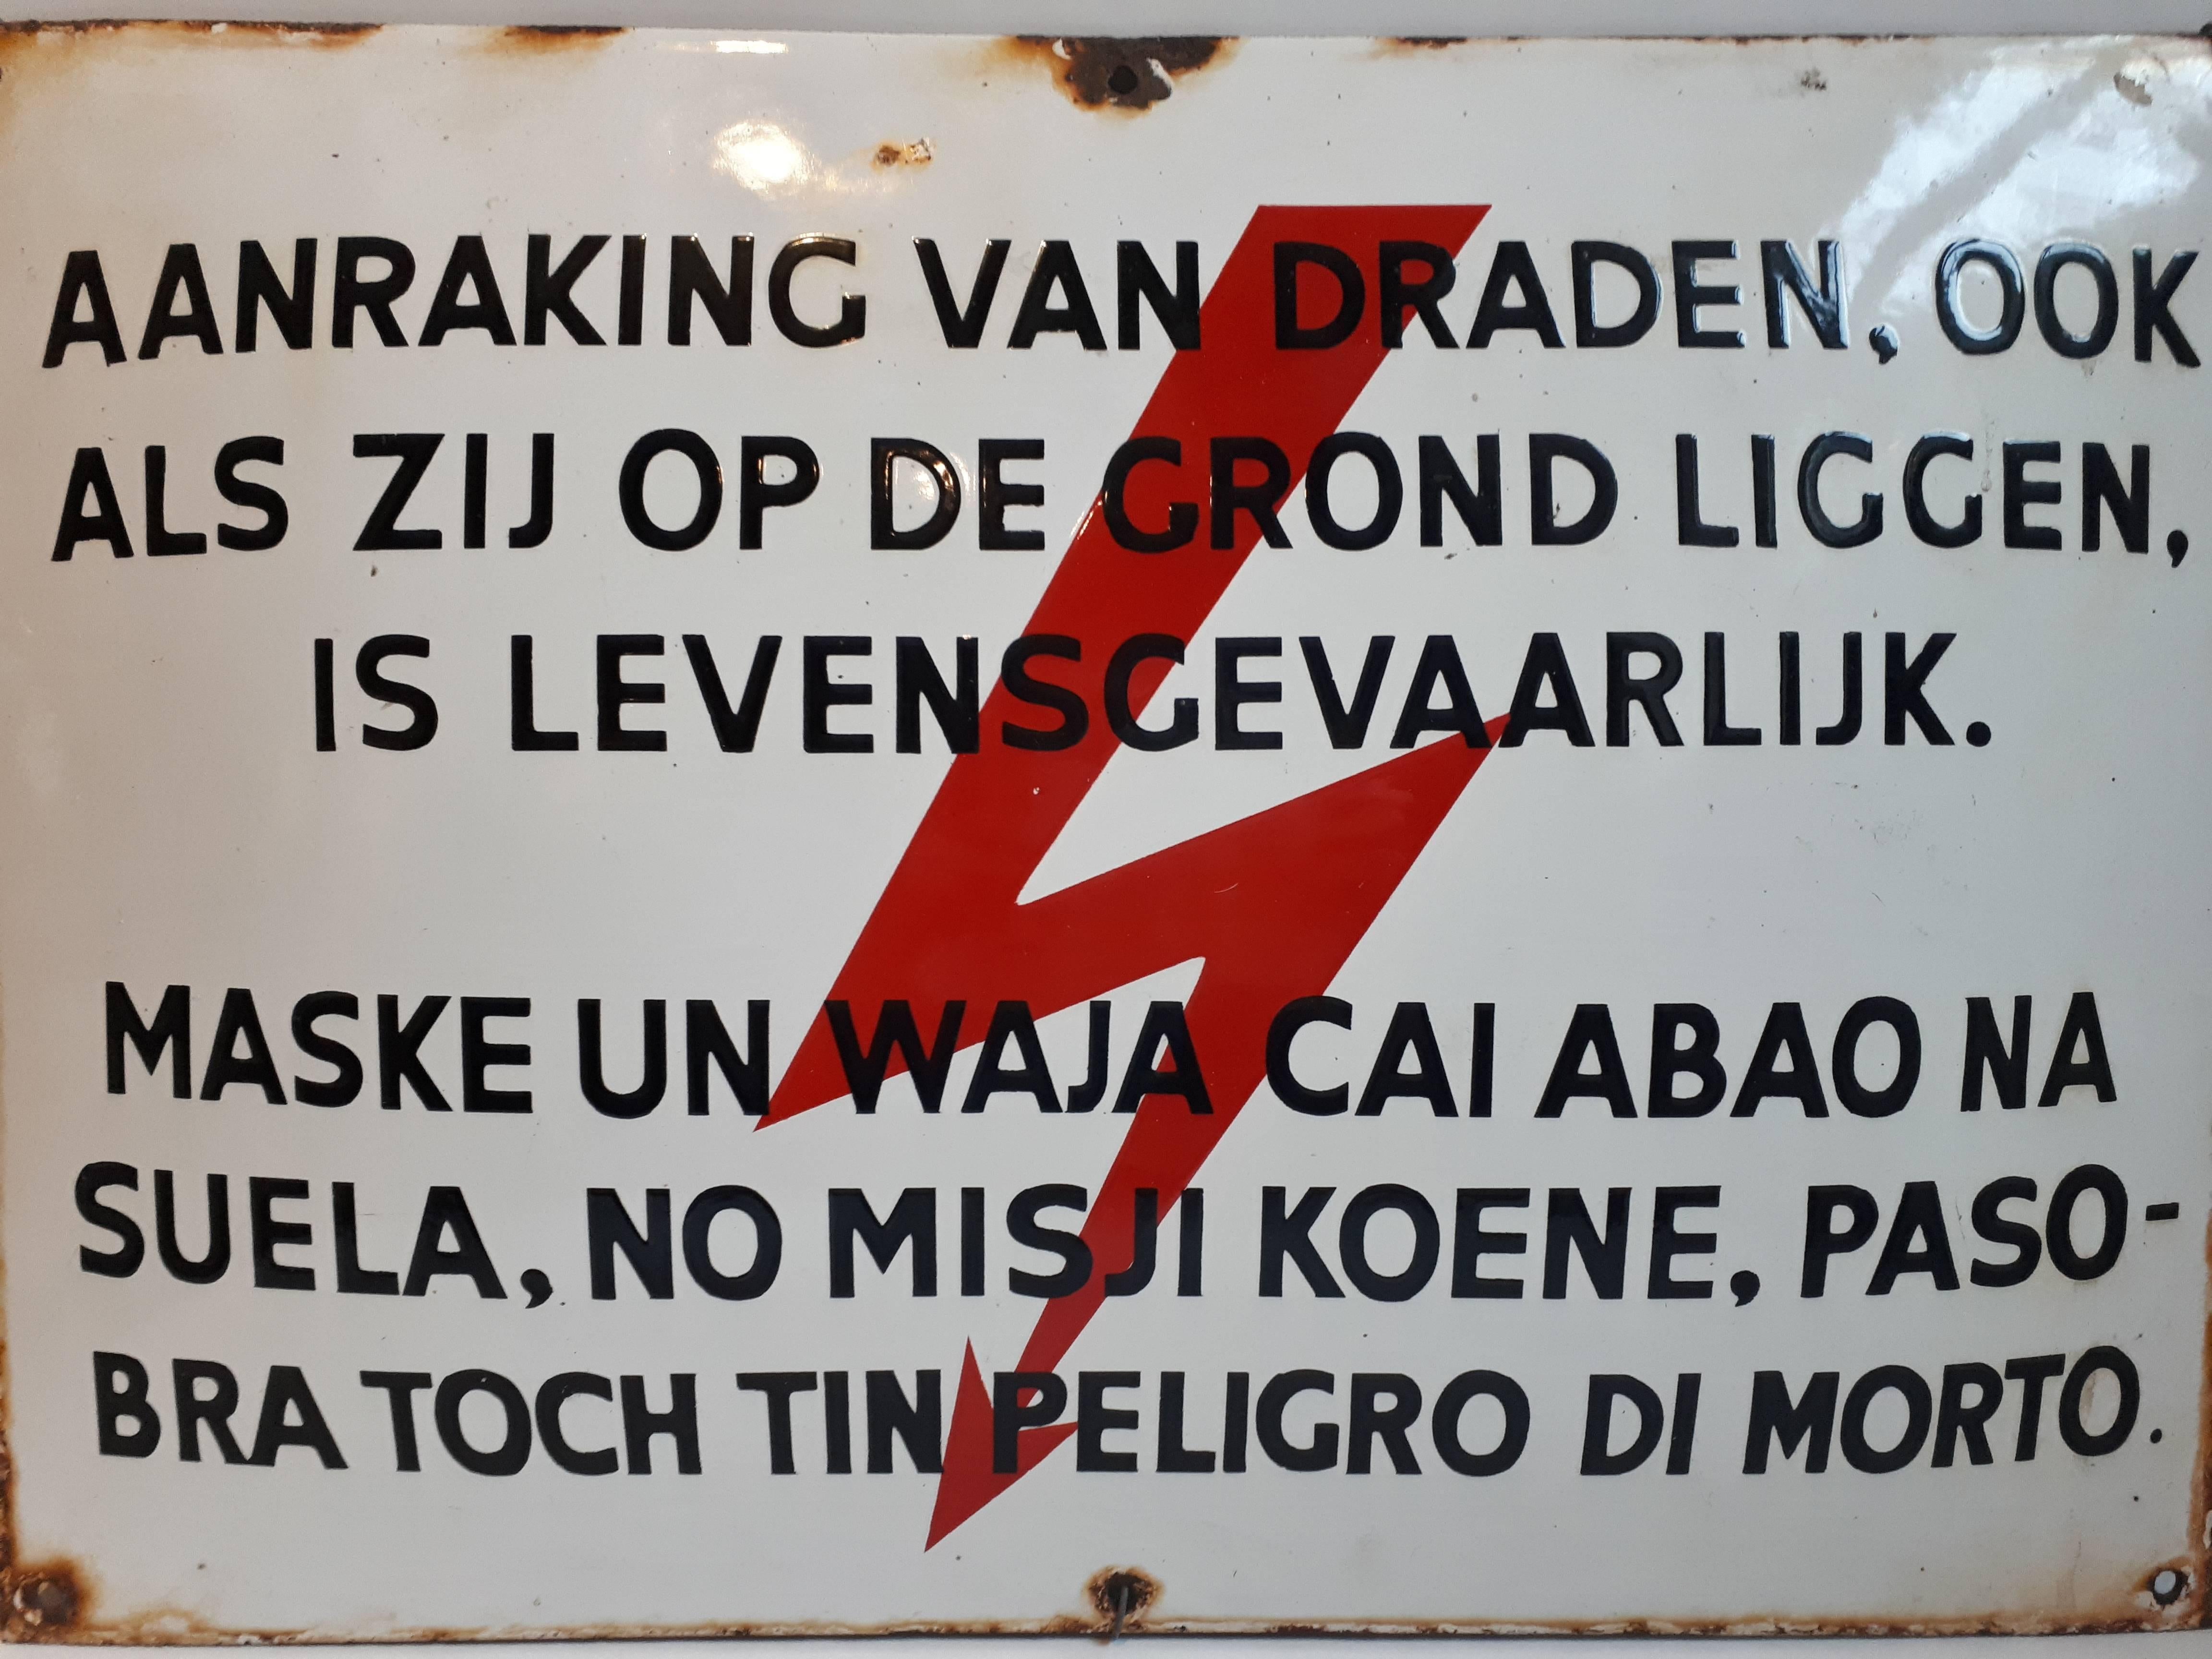 An orignal enamel sign that was used as a warning for the people on one the ABC Islands. 

Papiamentu (or Papiamento) is a mixture of Spanish, Portuguese, Dutch, English, French, and it also has some Arawak Indian and African influences.